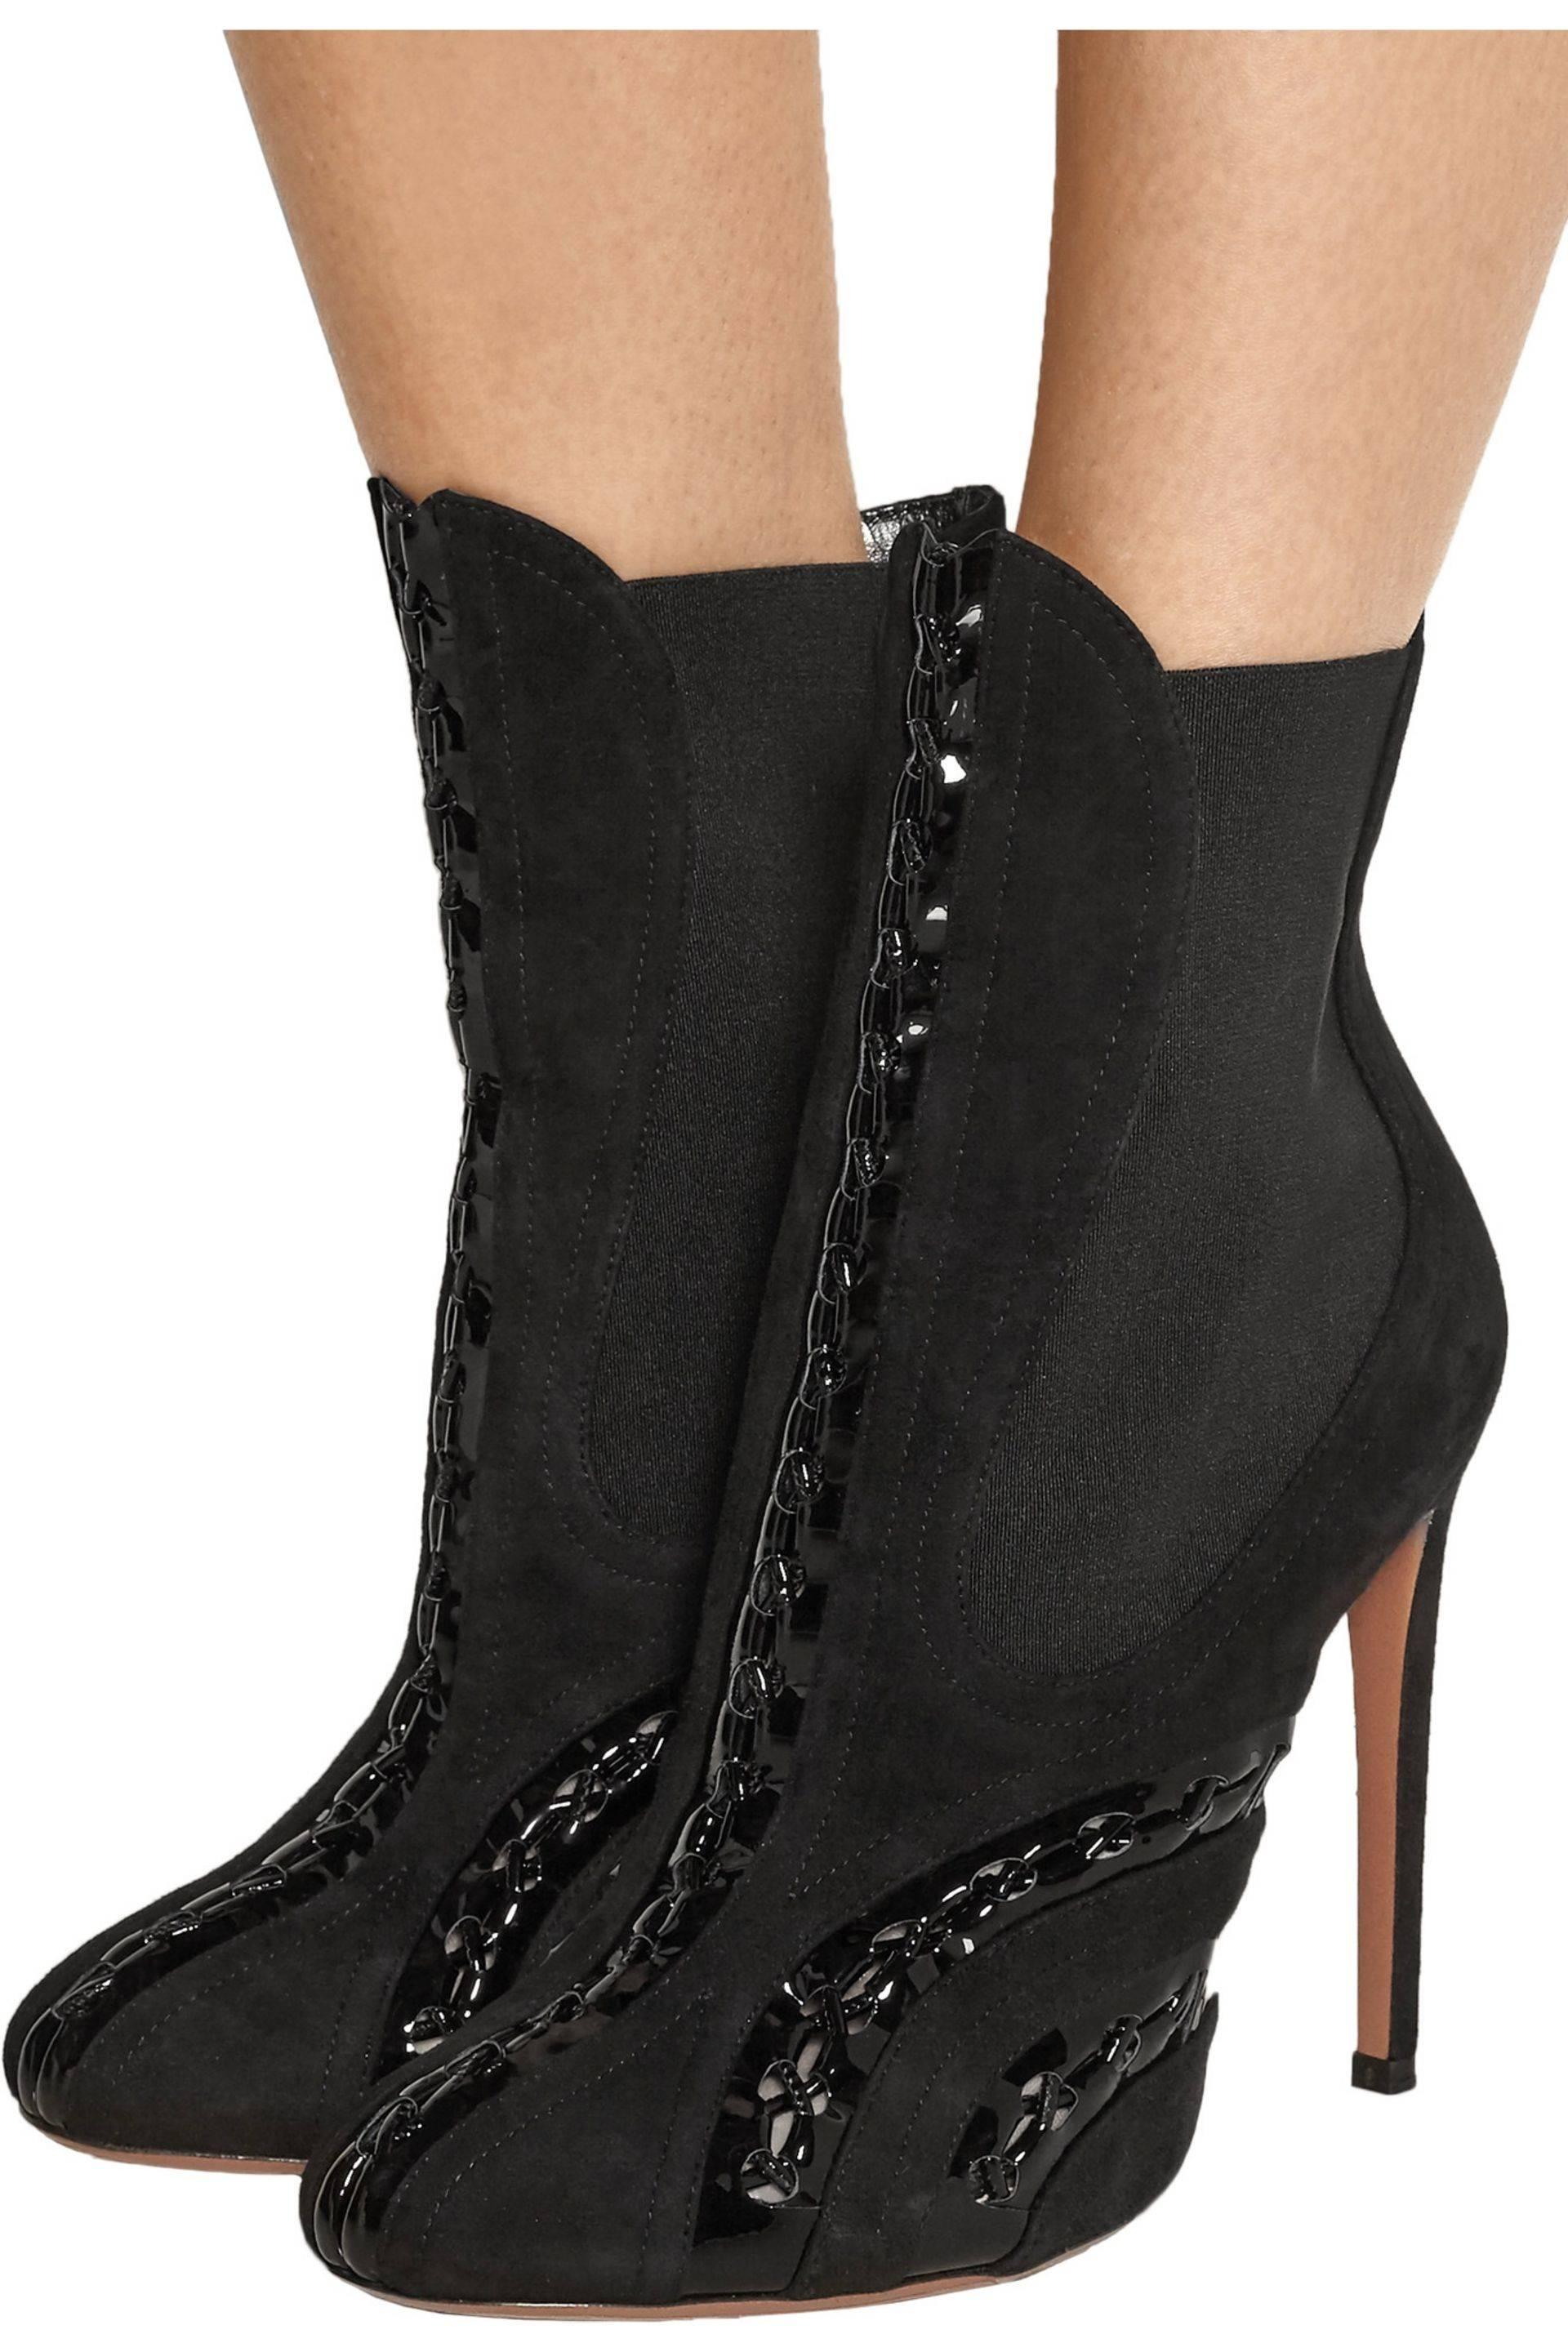 Alaia New Black Suede Patent Leather Ankle Boots Booties in Box

Size EU 36.5 - Not your size?  Message us to help you find yours!
Suede
Patent leather
Pull on
Made in Italy
Heel height 4.50"
Includes original Alaia dust bag and box